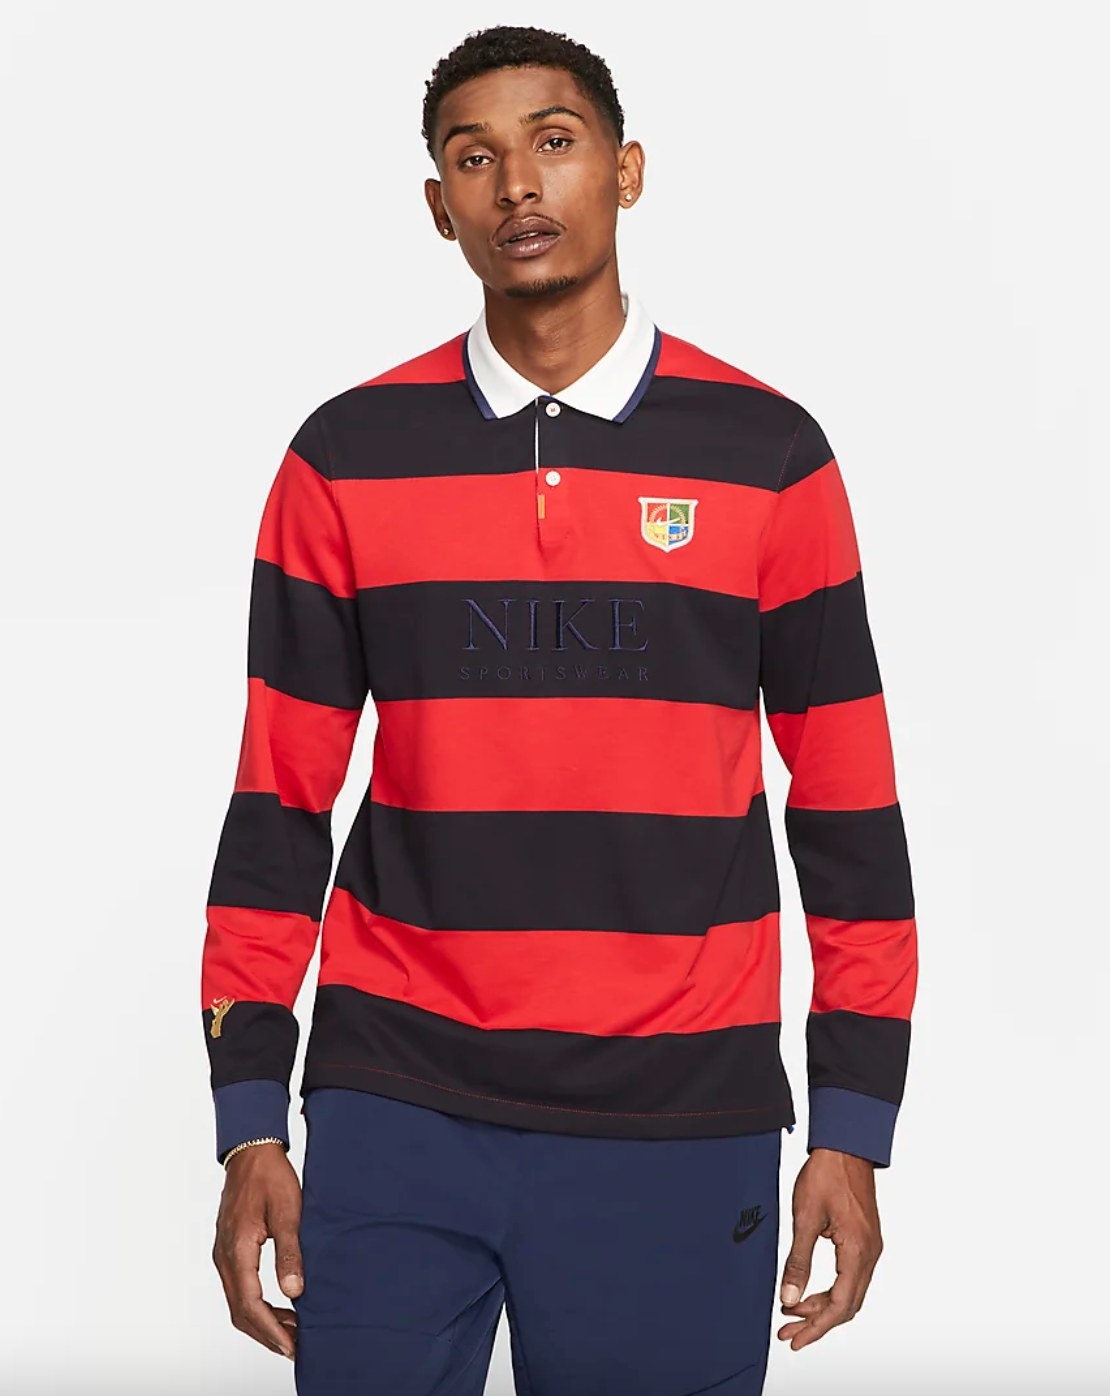 The long-sleeve polo shirt in red and black stripe with a white collar